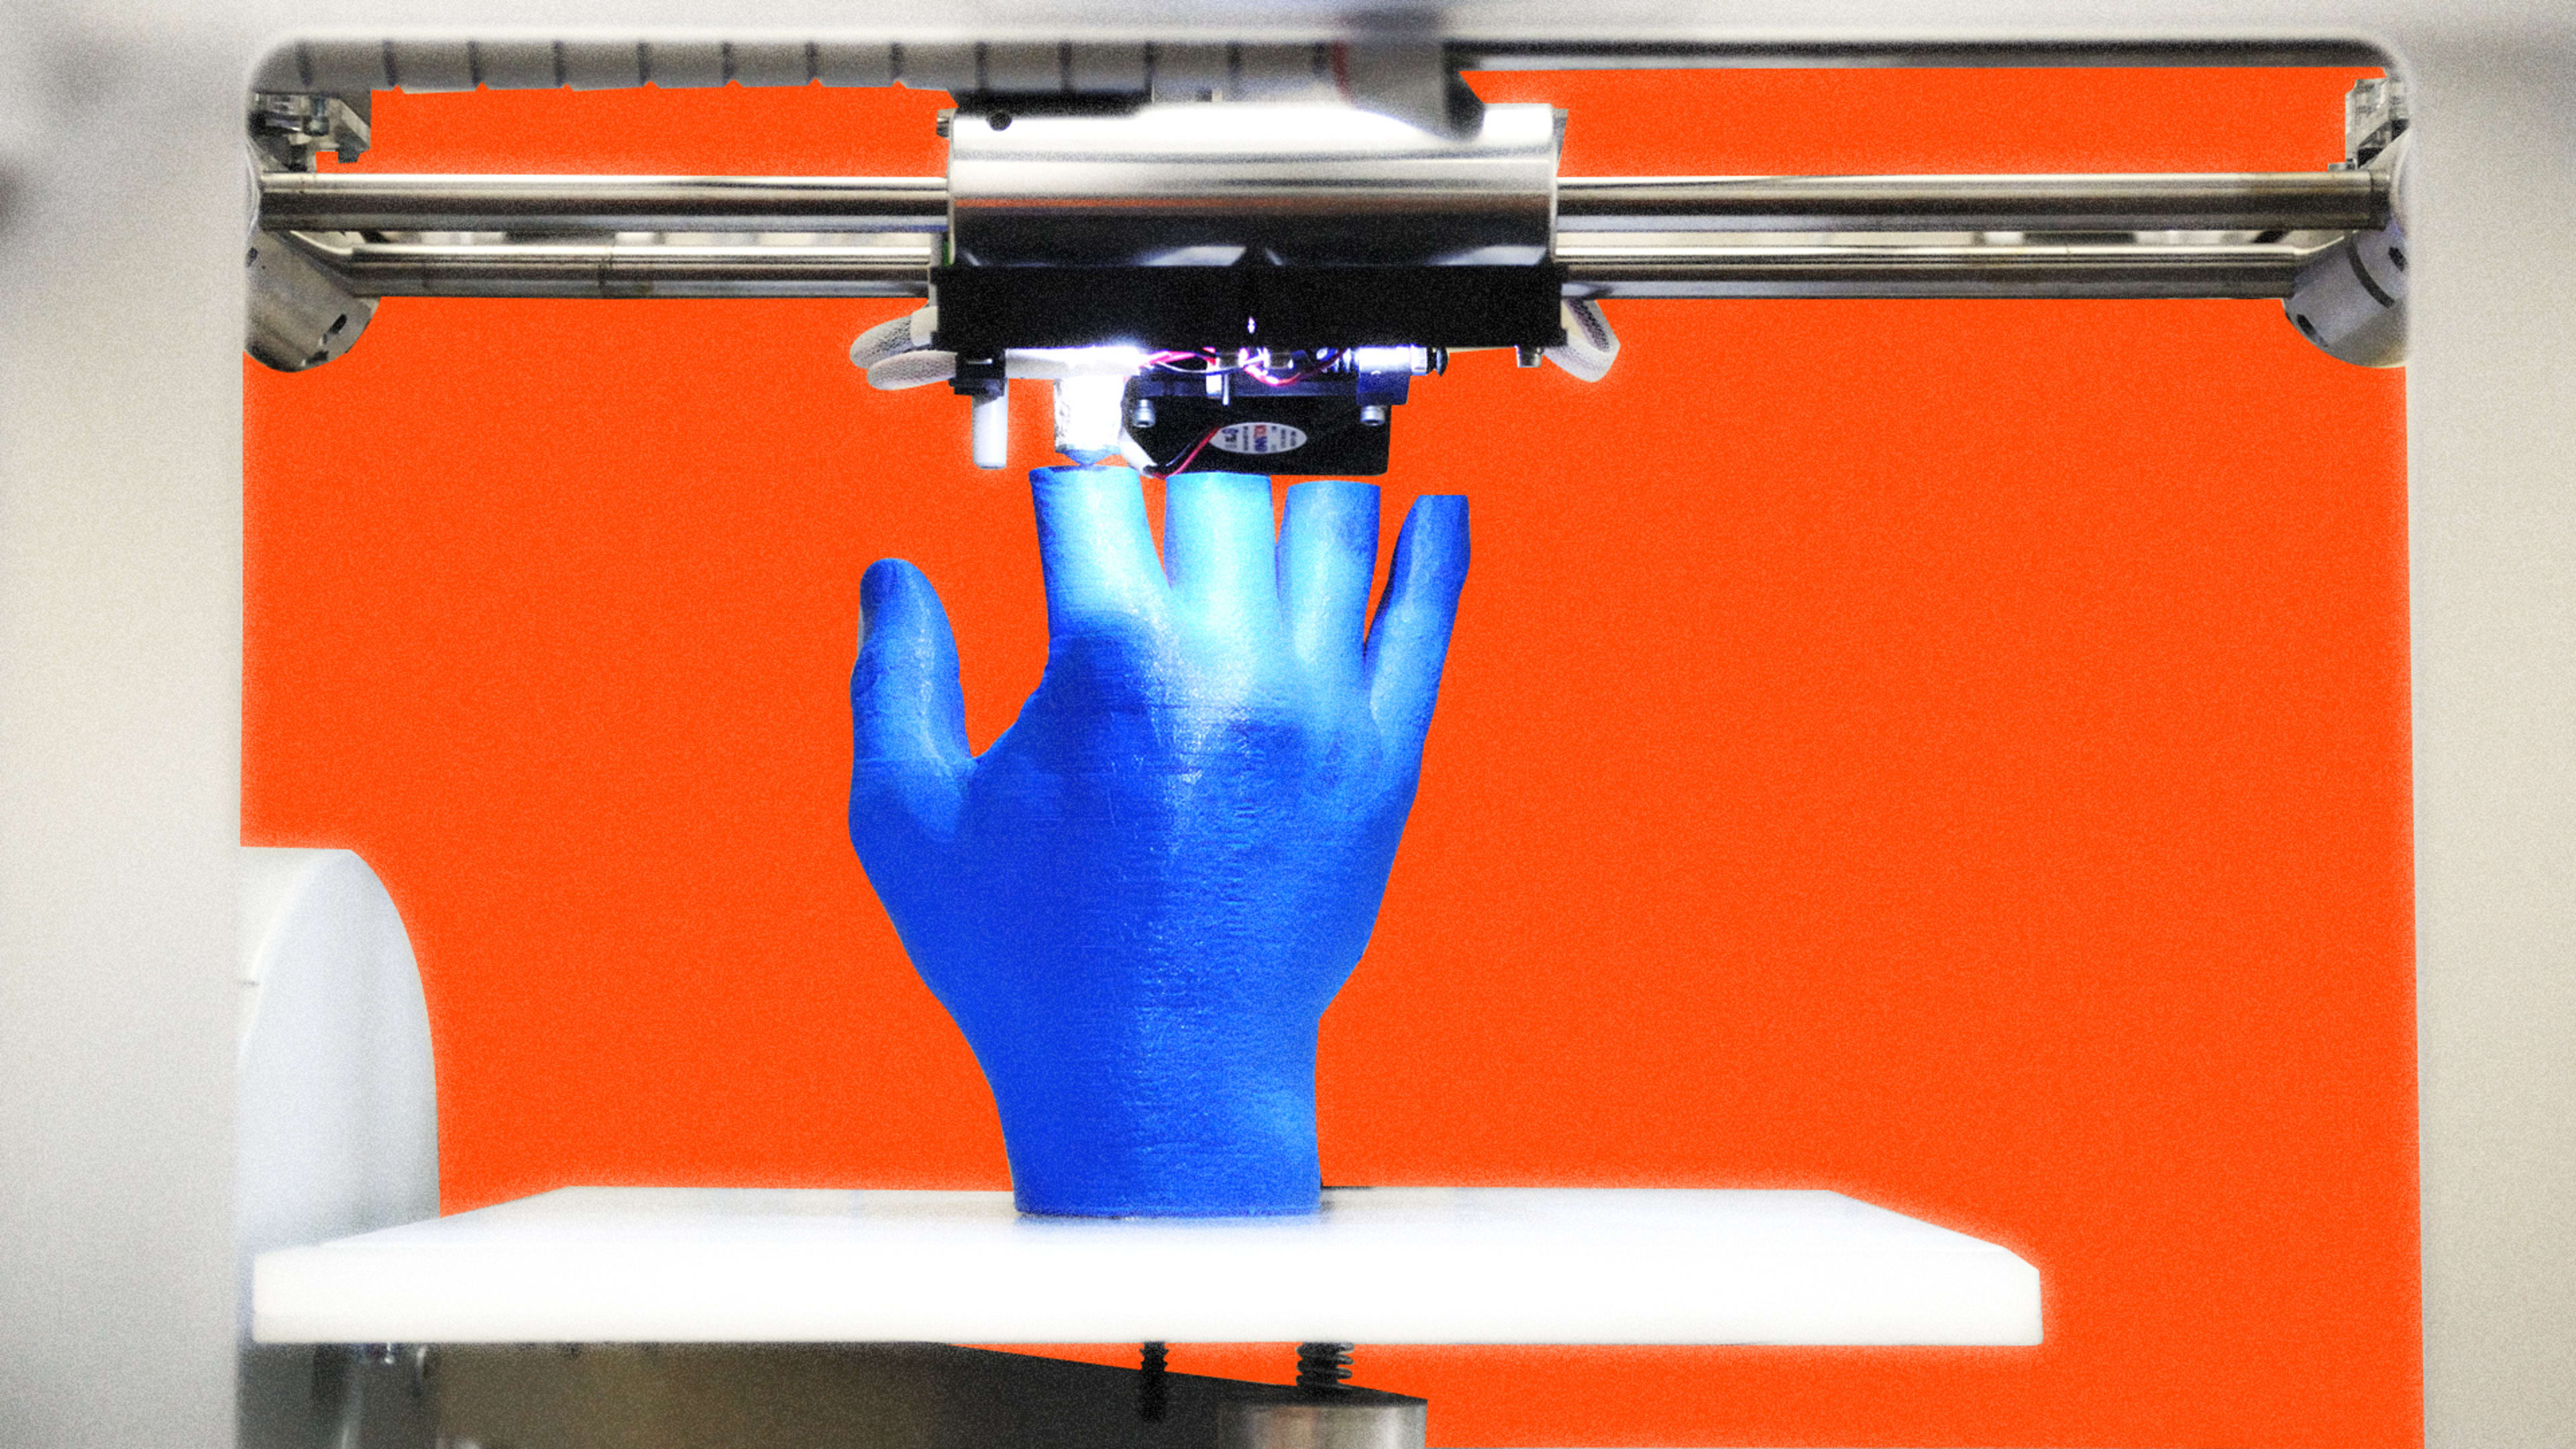 Why you should buy your grandparents a 3D printer